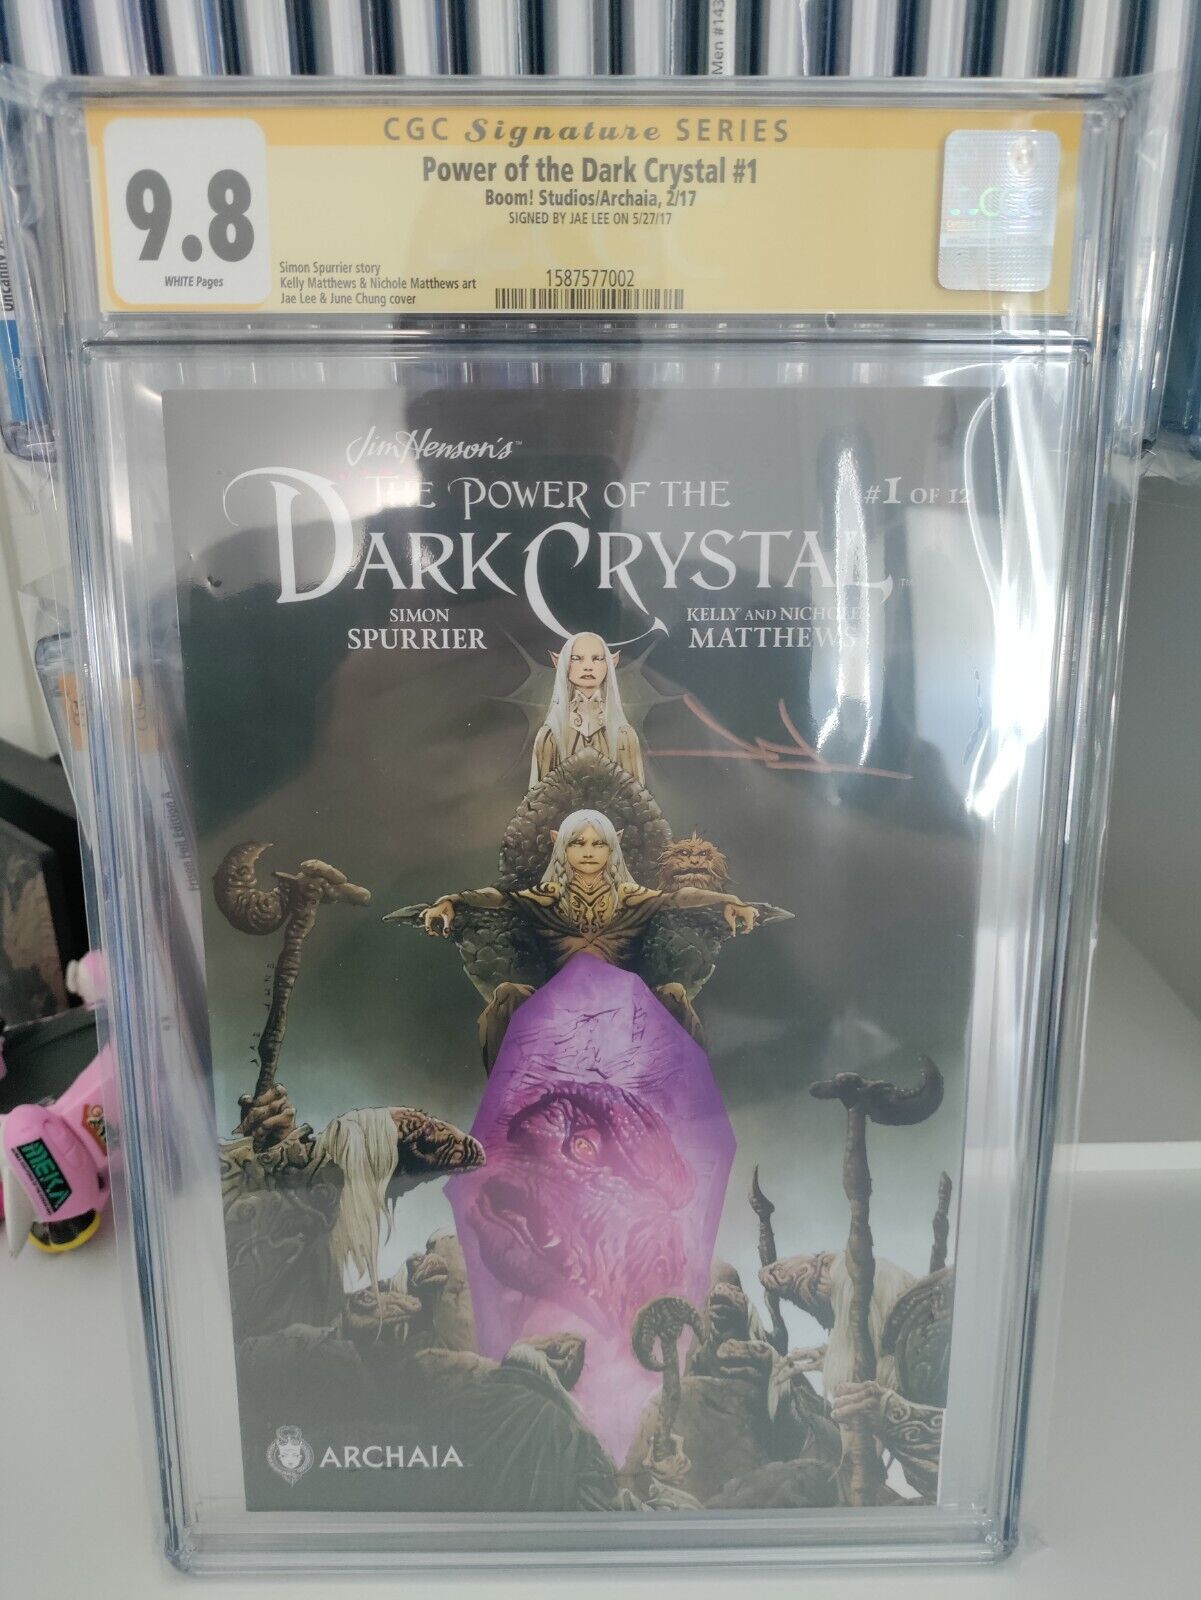 JIM HENSON'S POWER OF THE DARK CRYSTAL #1 1st PRINT CGC SS 9.8 SIGNED BY JAE LEE